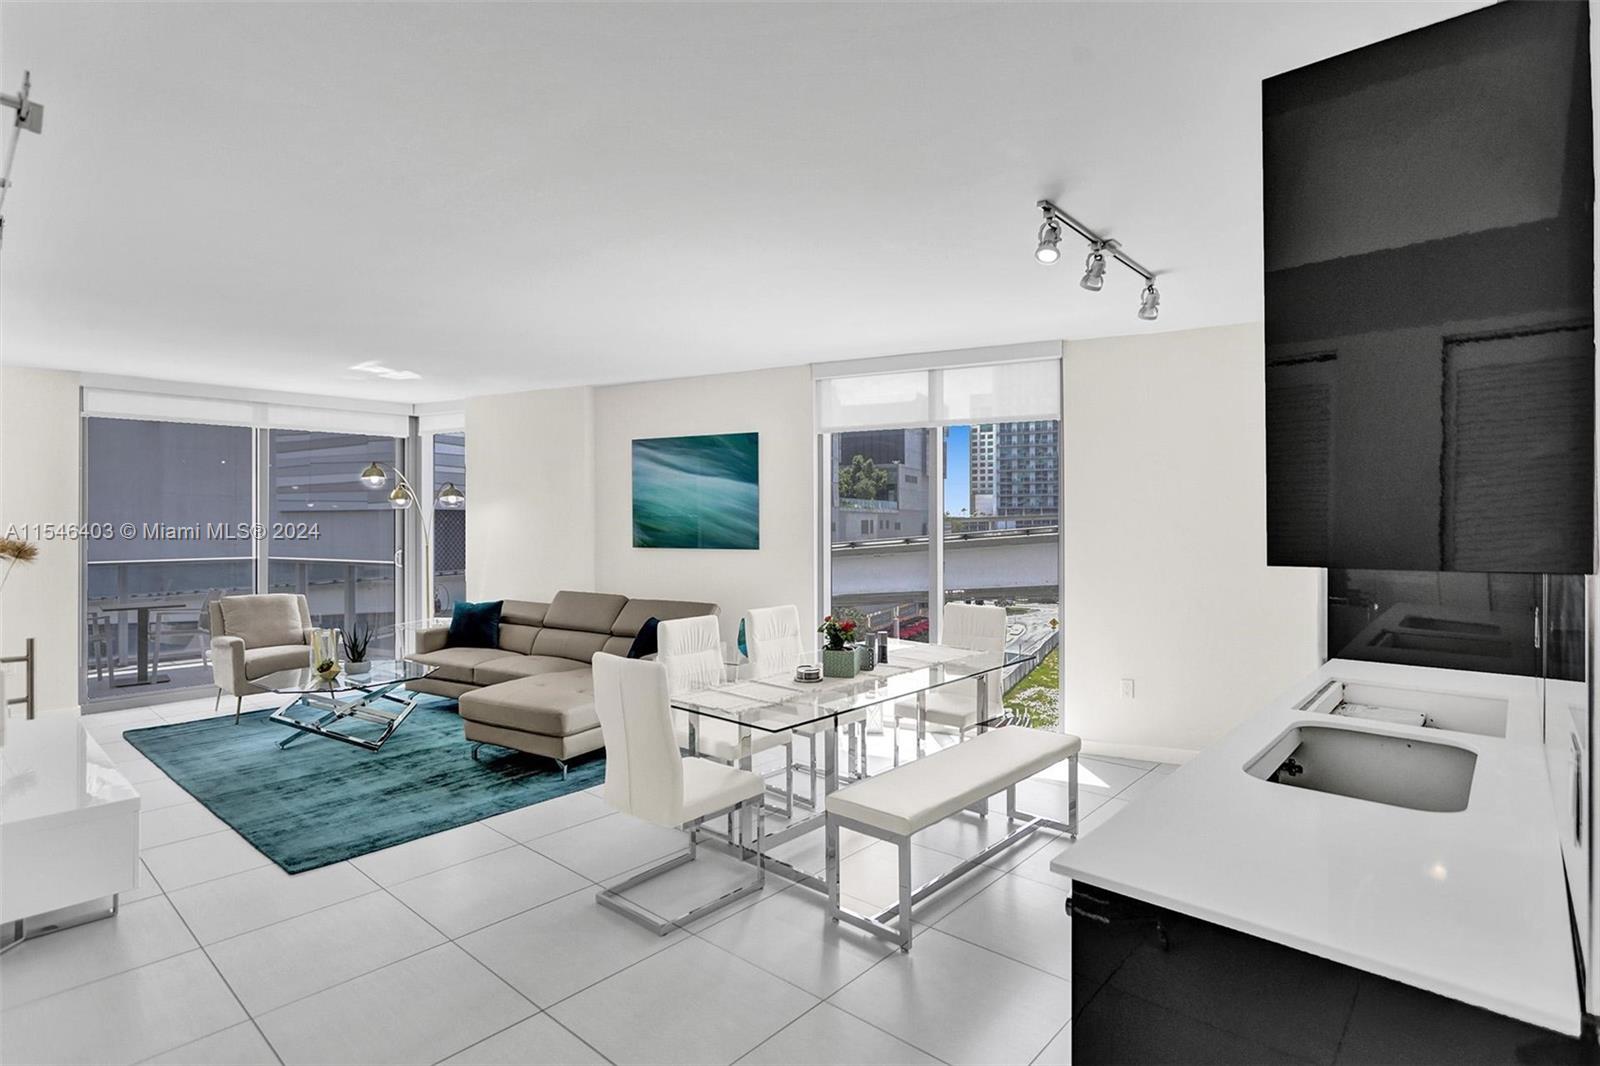 Welcome to Mybrickell, where luxury living meets urban convenience. This fully furnished, sophisticated, and modern corner unit is a testament to contemporary living at its finest. With 3 beds and 2 baths (den converted into a 3 bed) this unit offers both spaciousness and functionality. Italian kitchen, while floor-to-ceiling impact windows giving abundance of natural light. Walk-in closets, a washer/dryer, and day-to-night skyline views further enhance the convenience and comfort of this residence. 24/7 doorman security and valet parking is included for your peace of mind, outdoor relaxation area, a sparkling pool, a sky rooftop deck with a Jacuzzi, a party room, fully-equipped gym, a business center and a kids playroom for family enjoyment. Next to BCC, I95, metromover and Mery Brickell